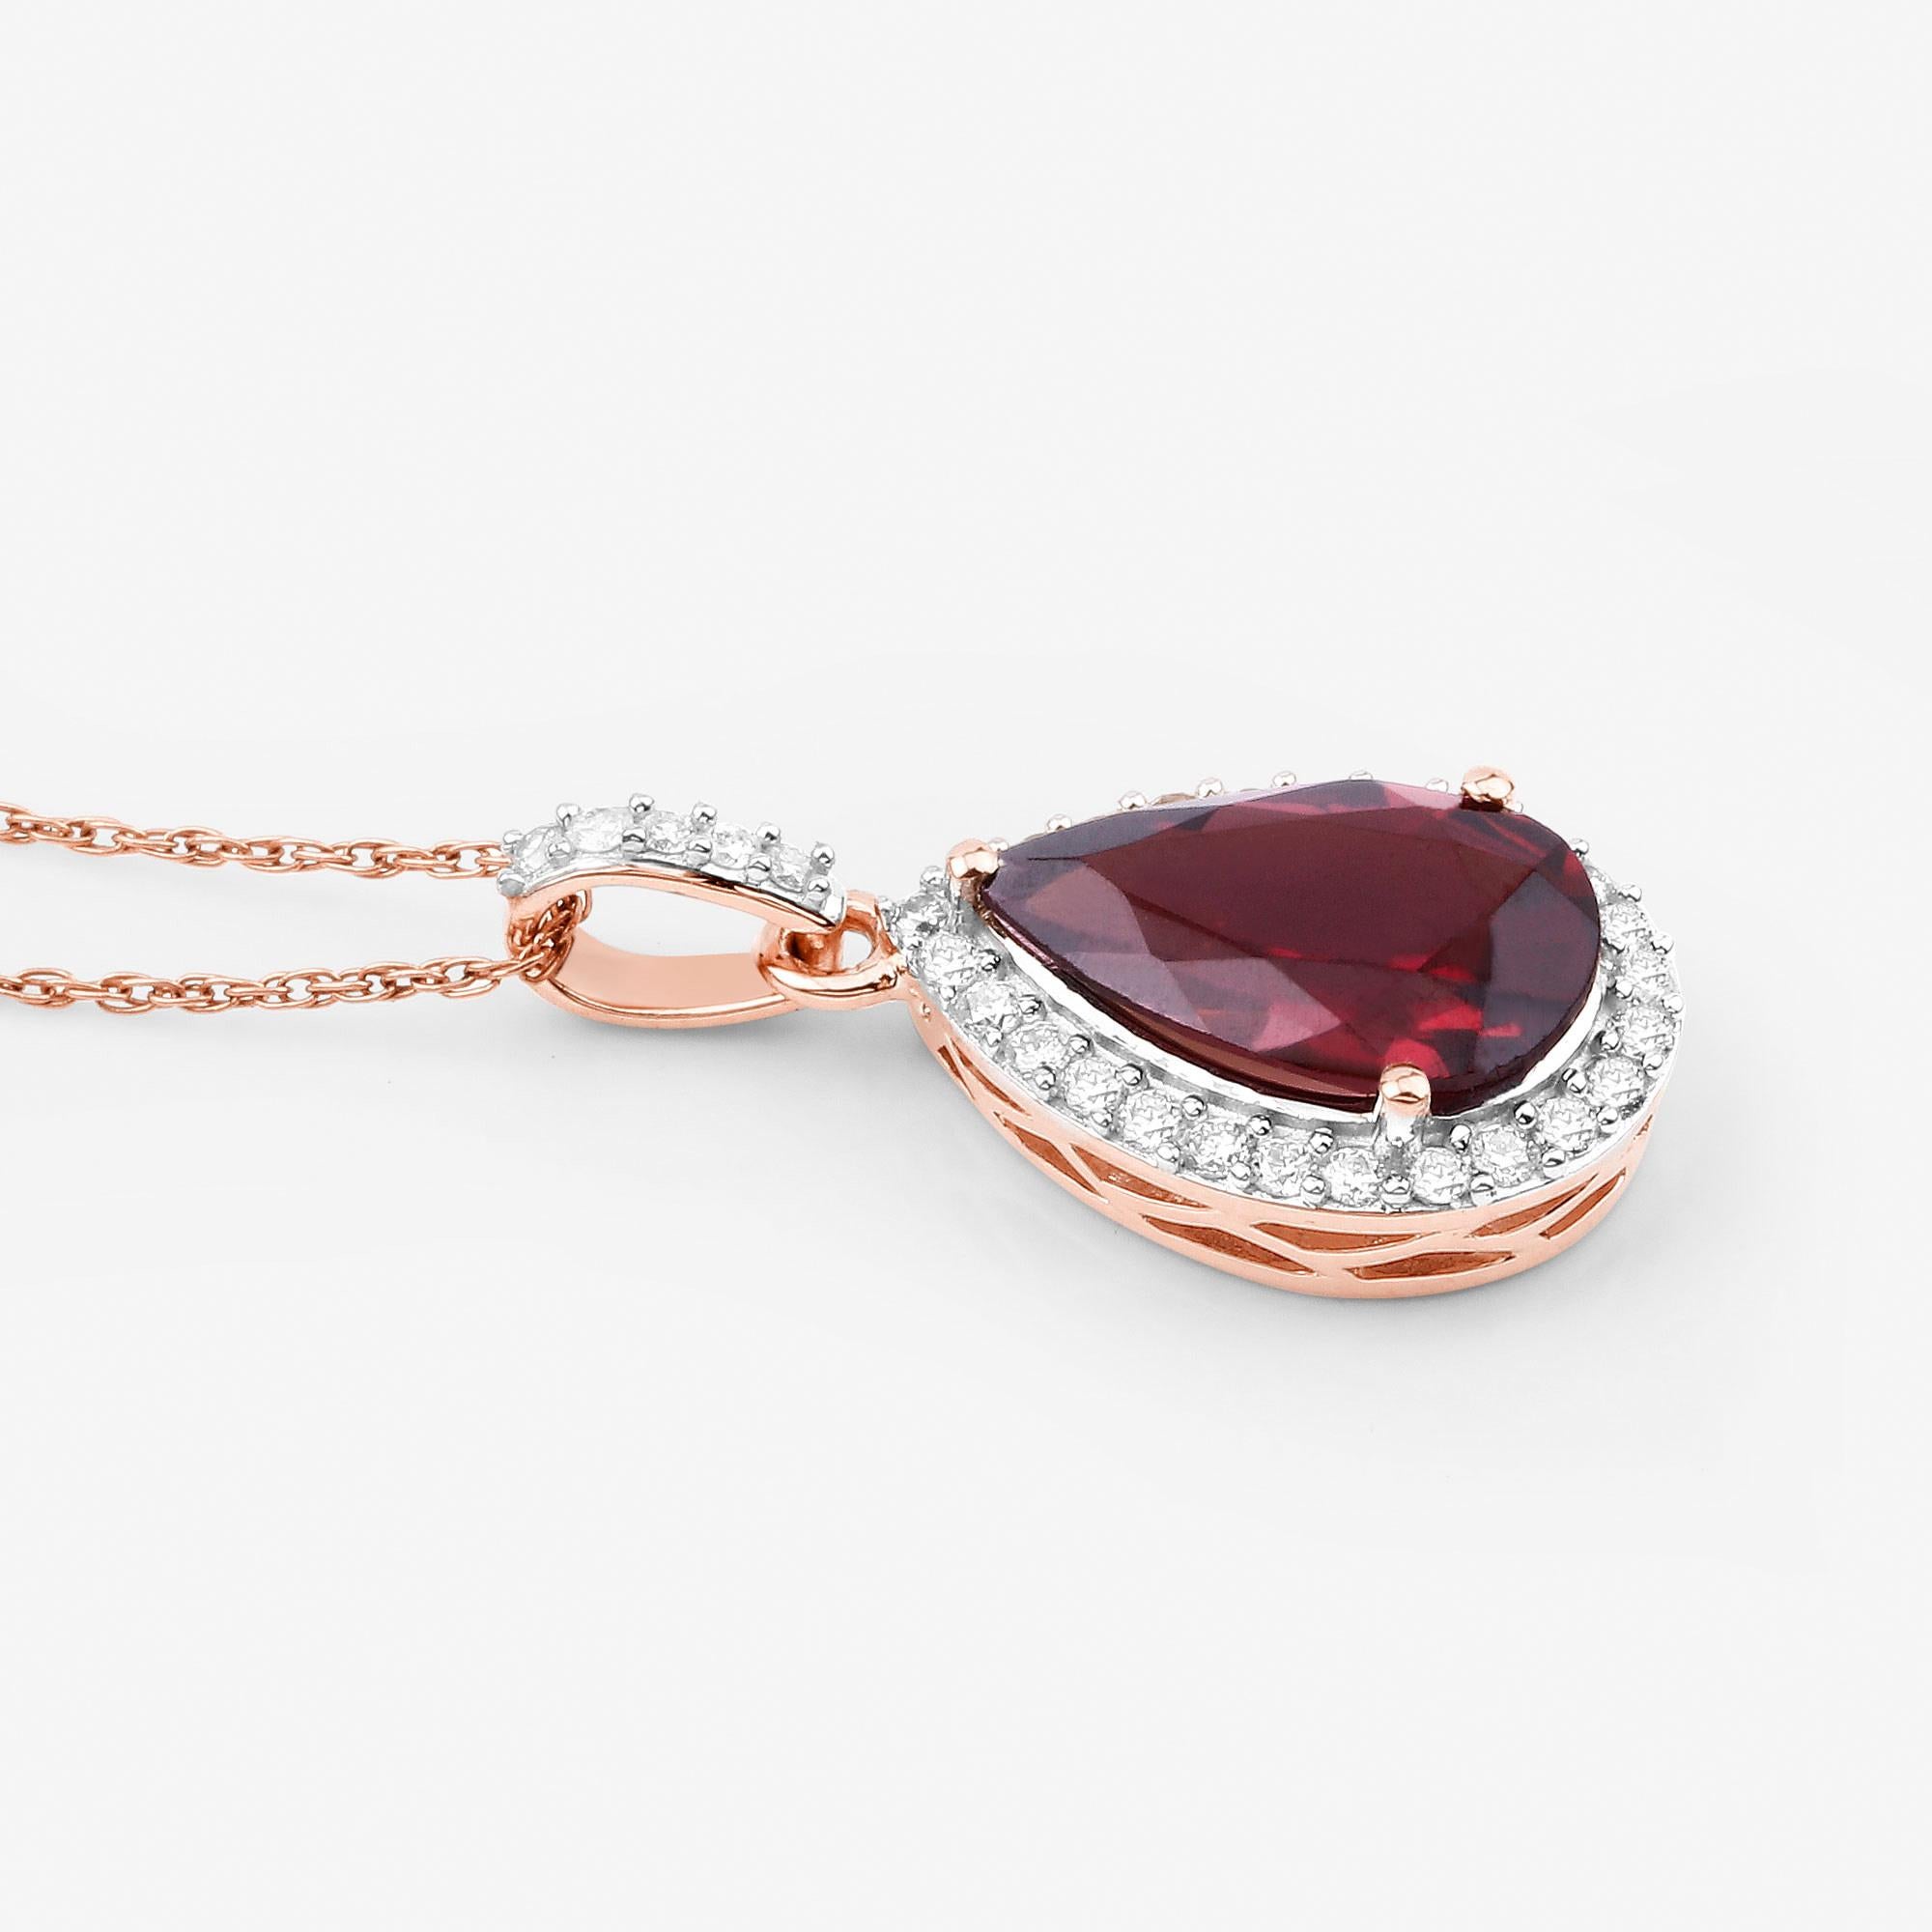 Natural Rhodolite Garnet and Diamond Halo Pendant 3.30 Carats 14k Rose Gold In Excellent Condition For Sale In Laguna Niguel, CA